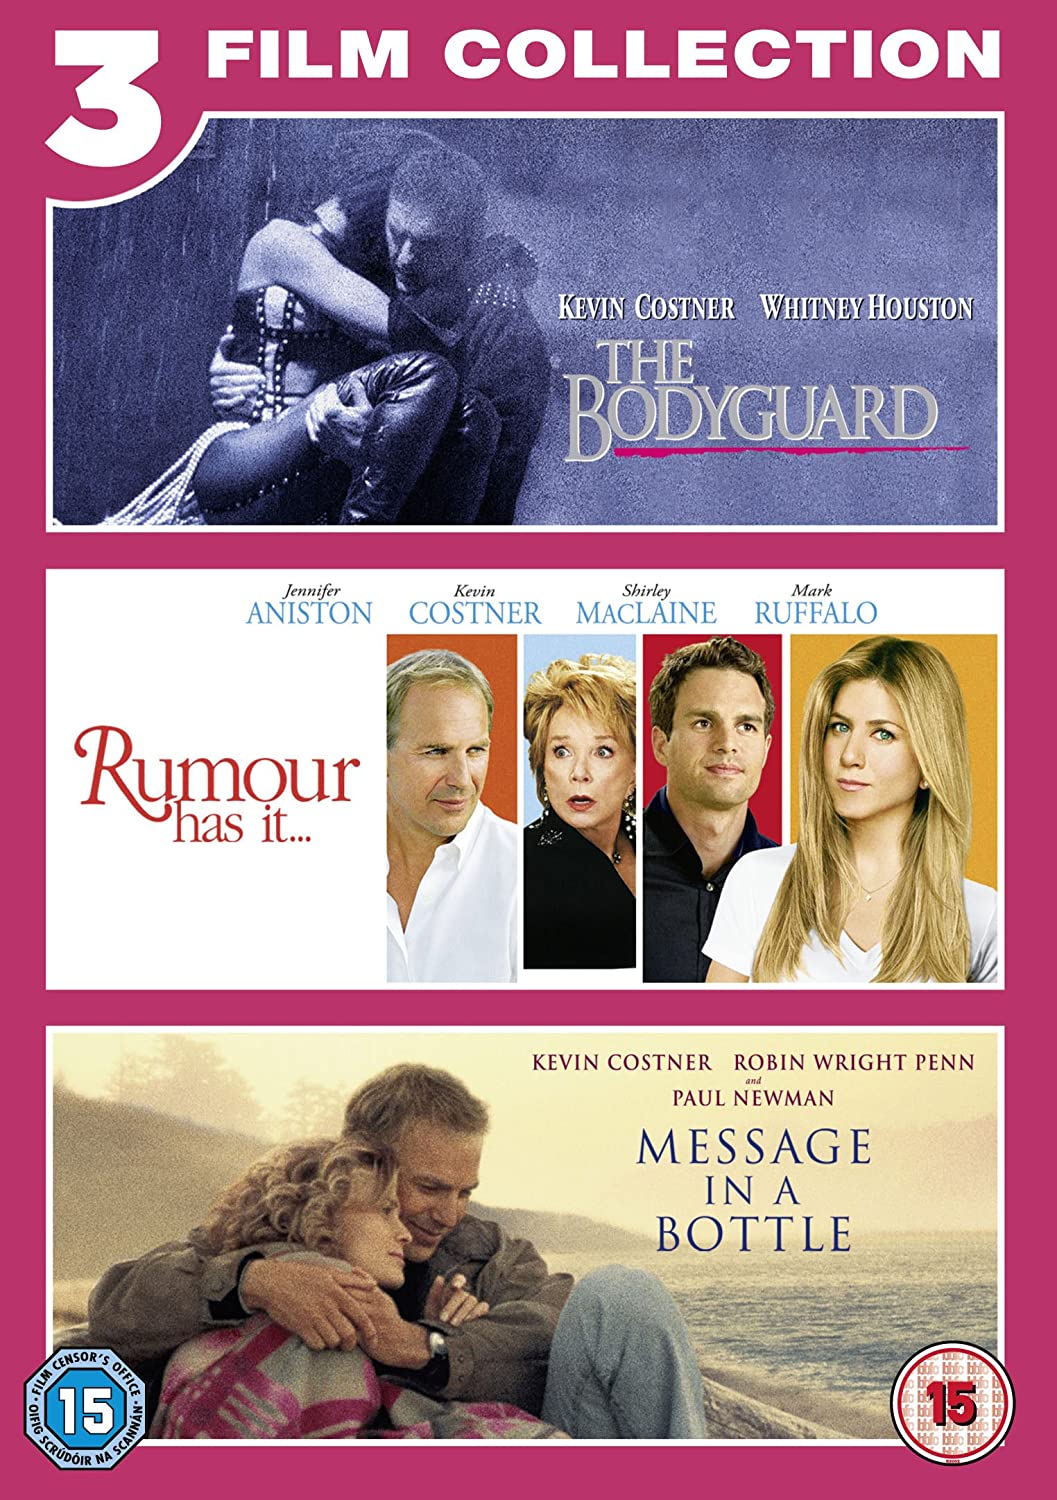 The Bodyguard/Rumour Has It/Message In A Bottle: [3 Film Collection] [2012] - Romance/Drama [DVD]